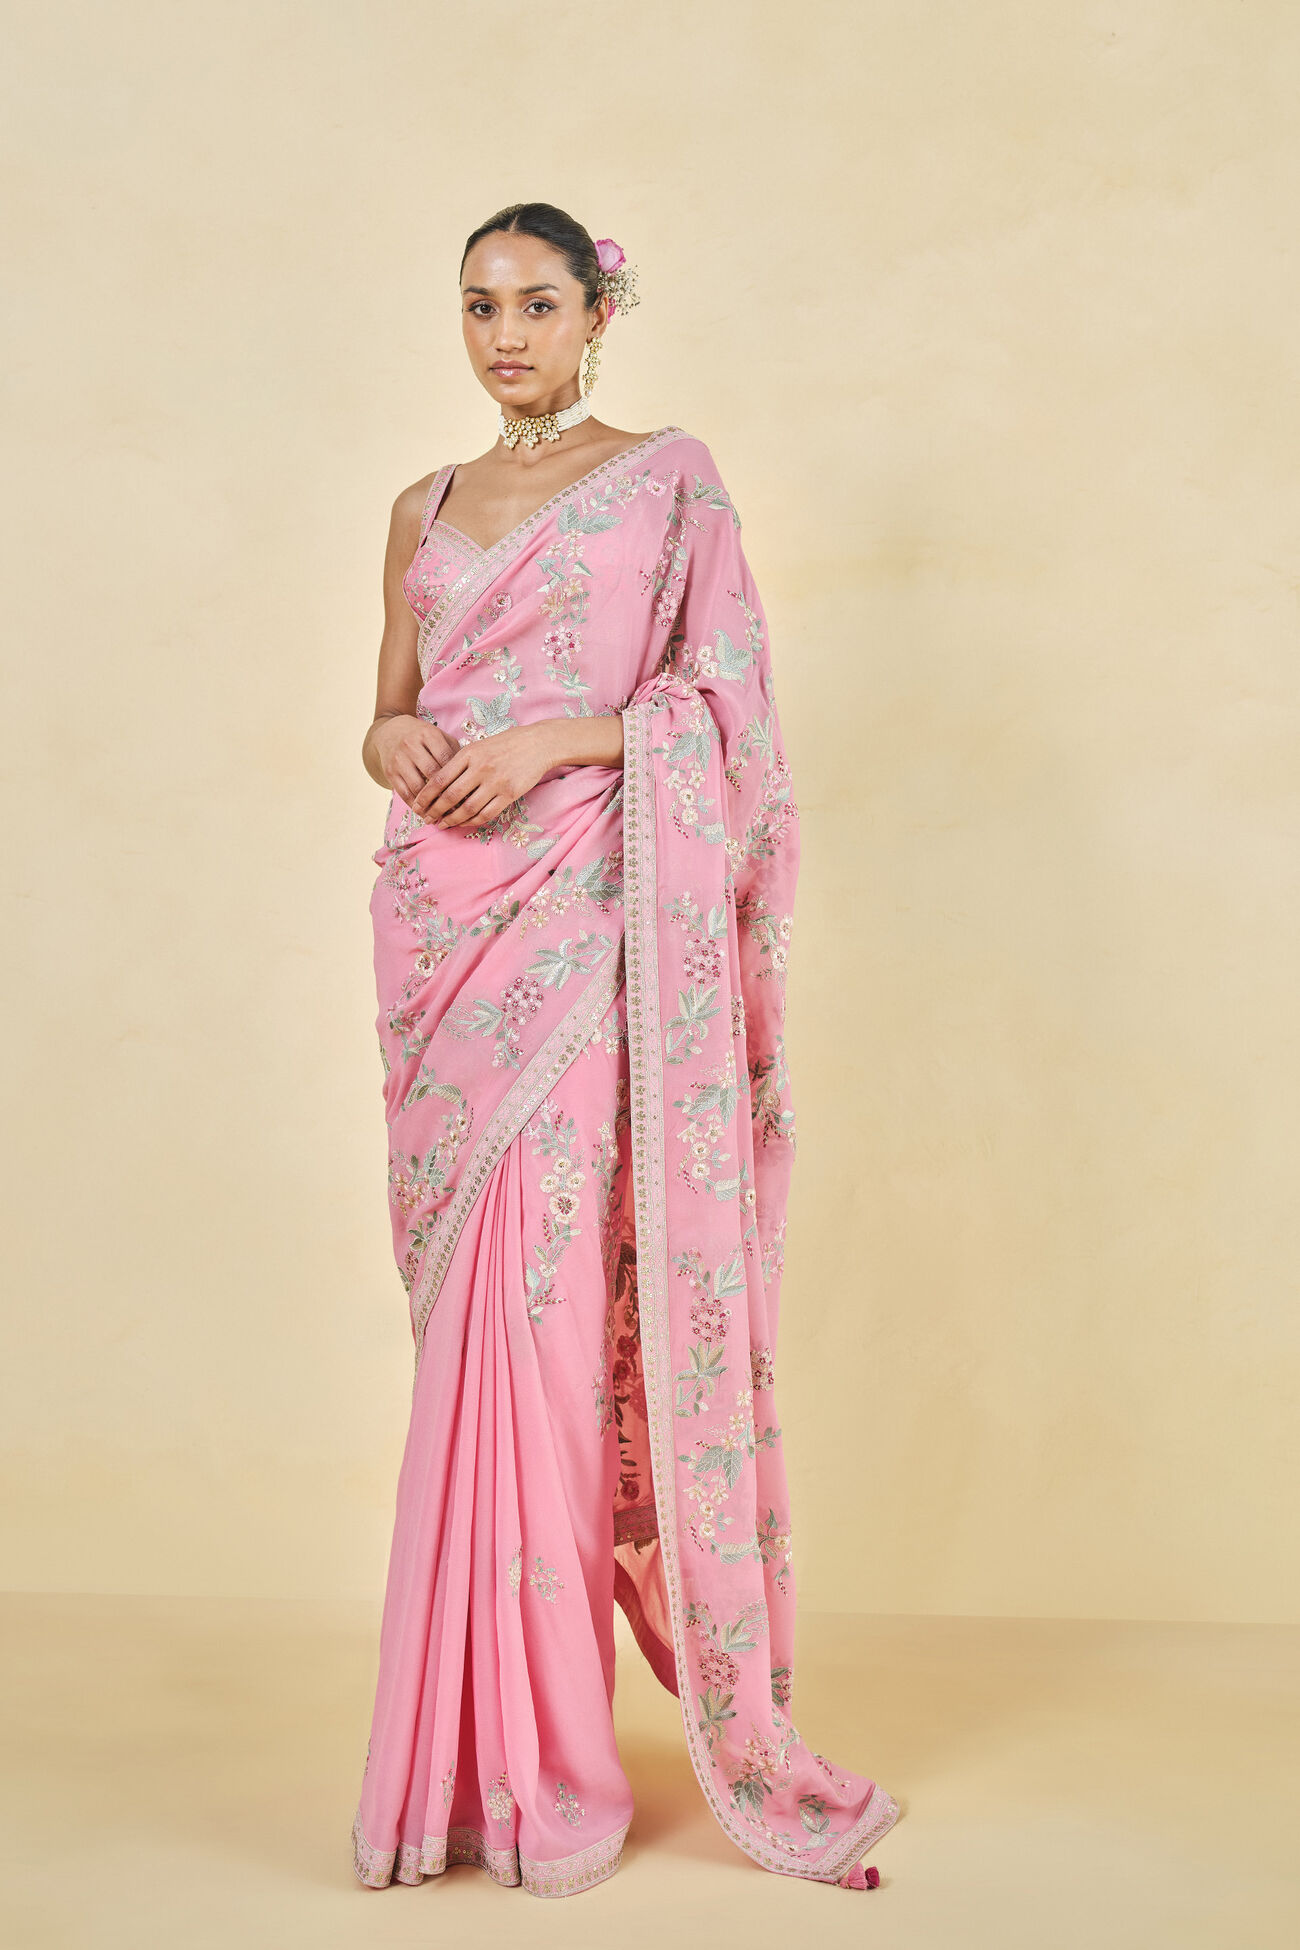 Dianthus Embroidered Georgette Saree - Pink, Pink, image 1